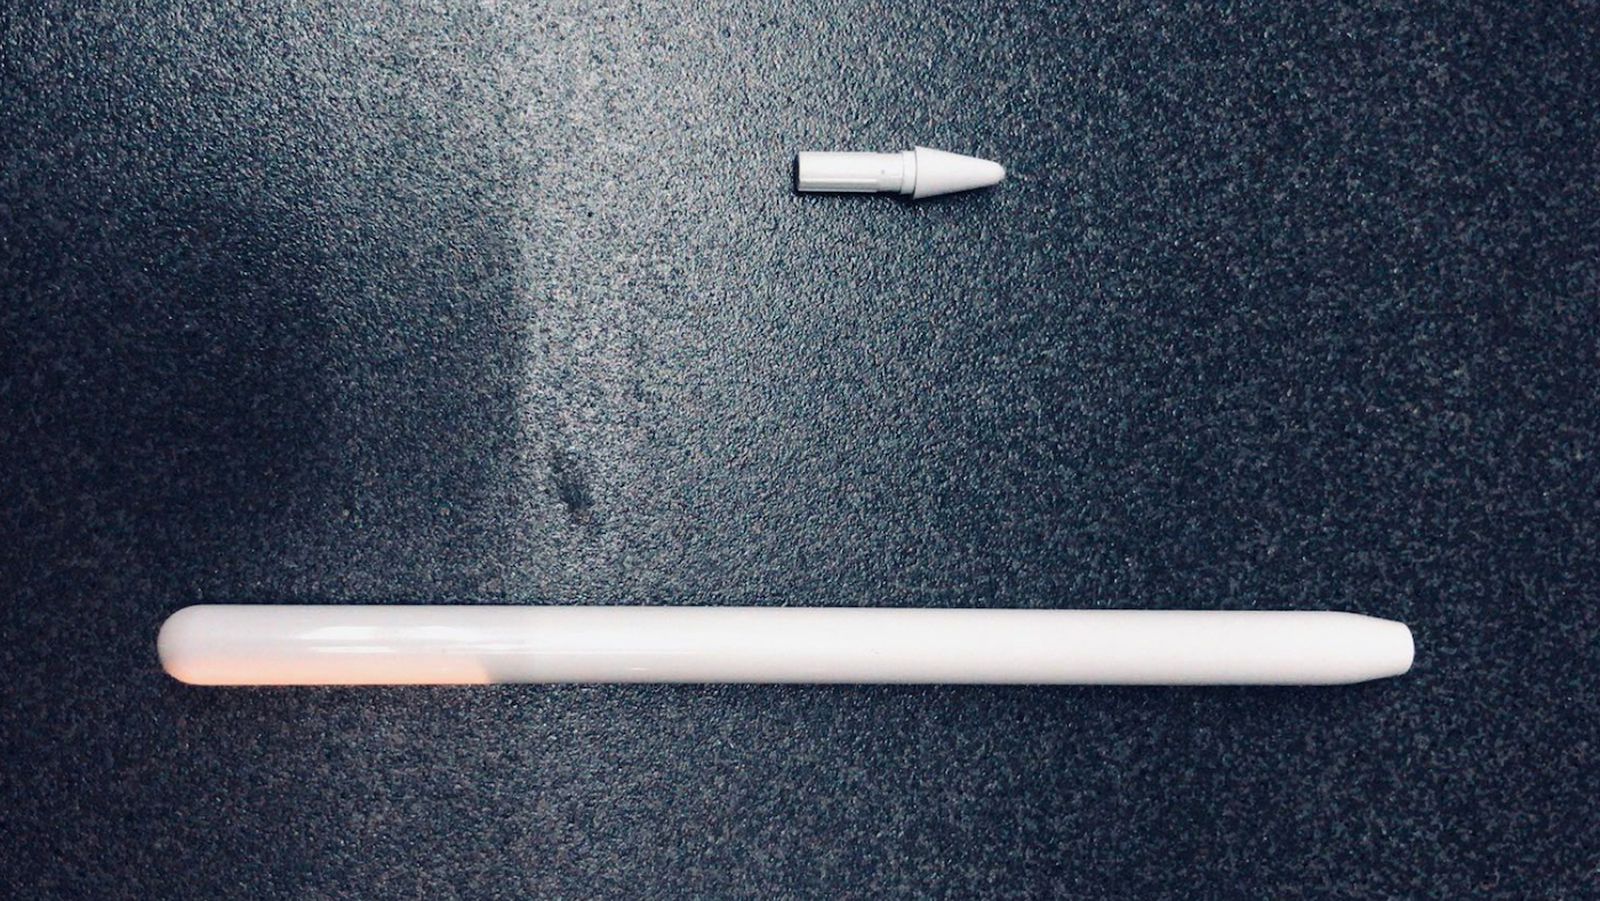 New apple pencil apparently leaks with a shiny finish and redesigned tip